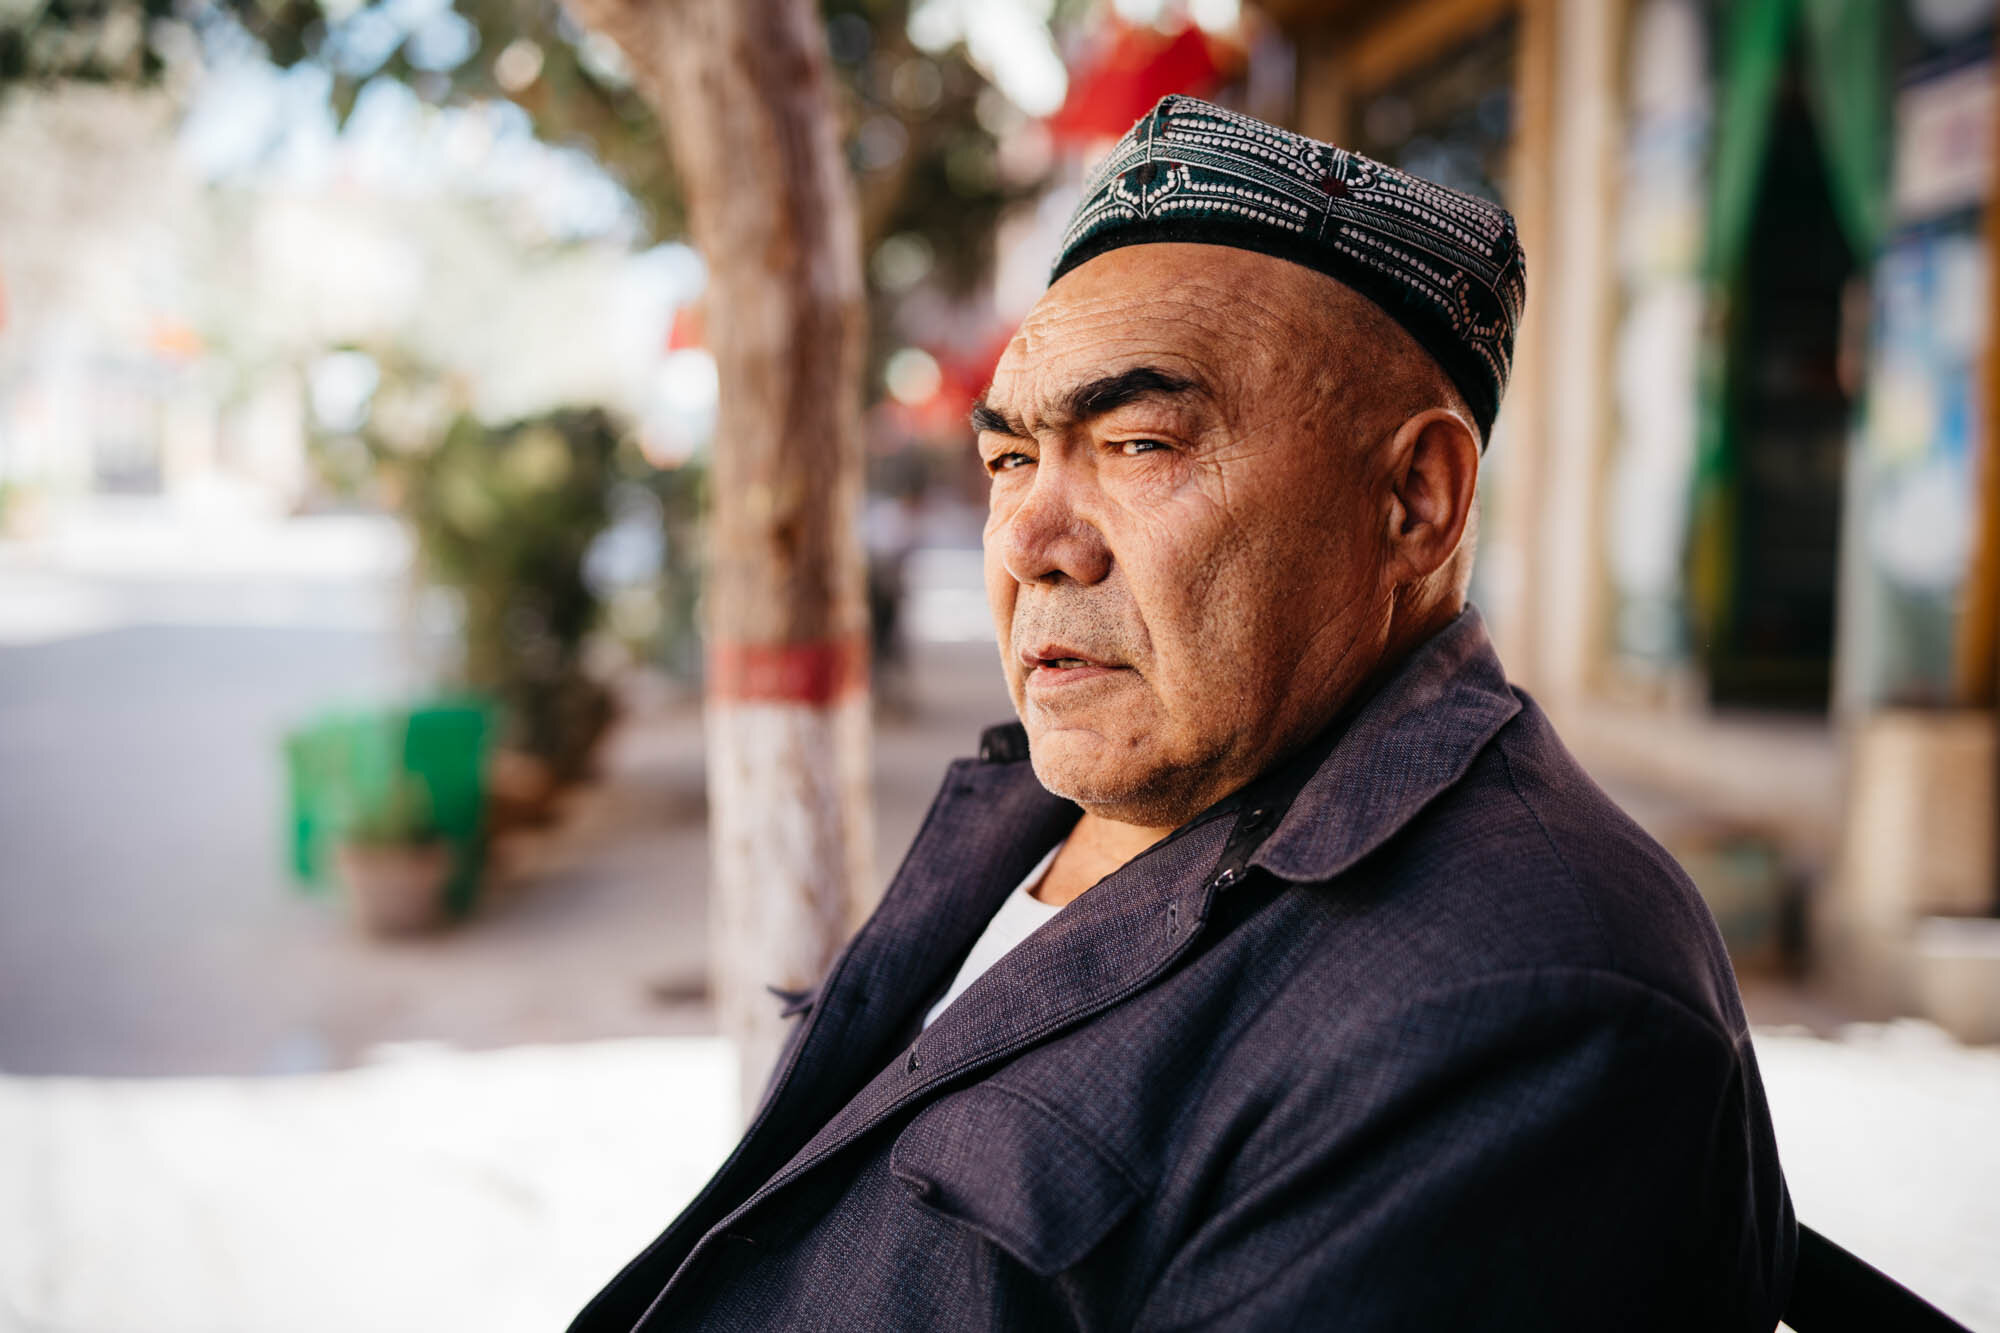  An Uyghur man in a traditional hat 